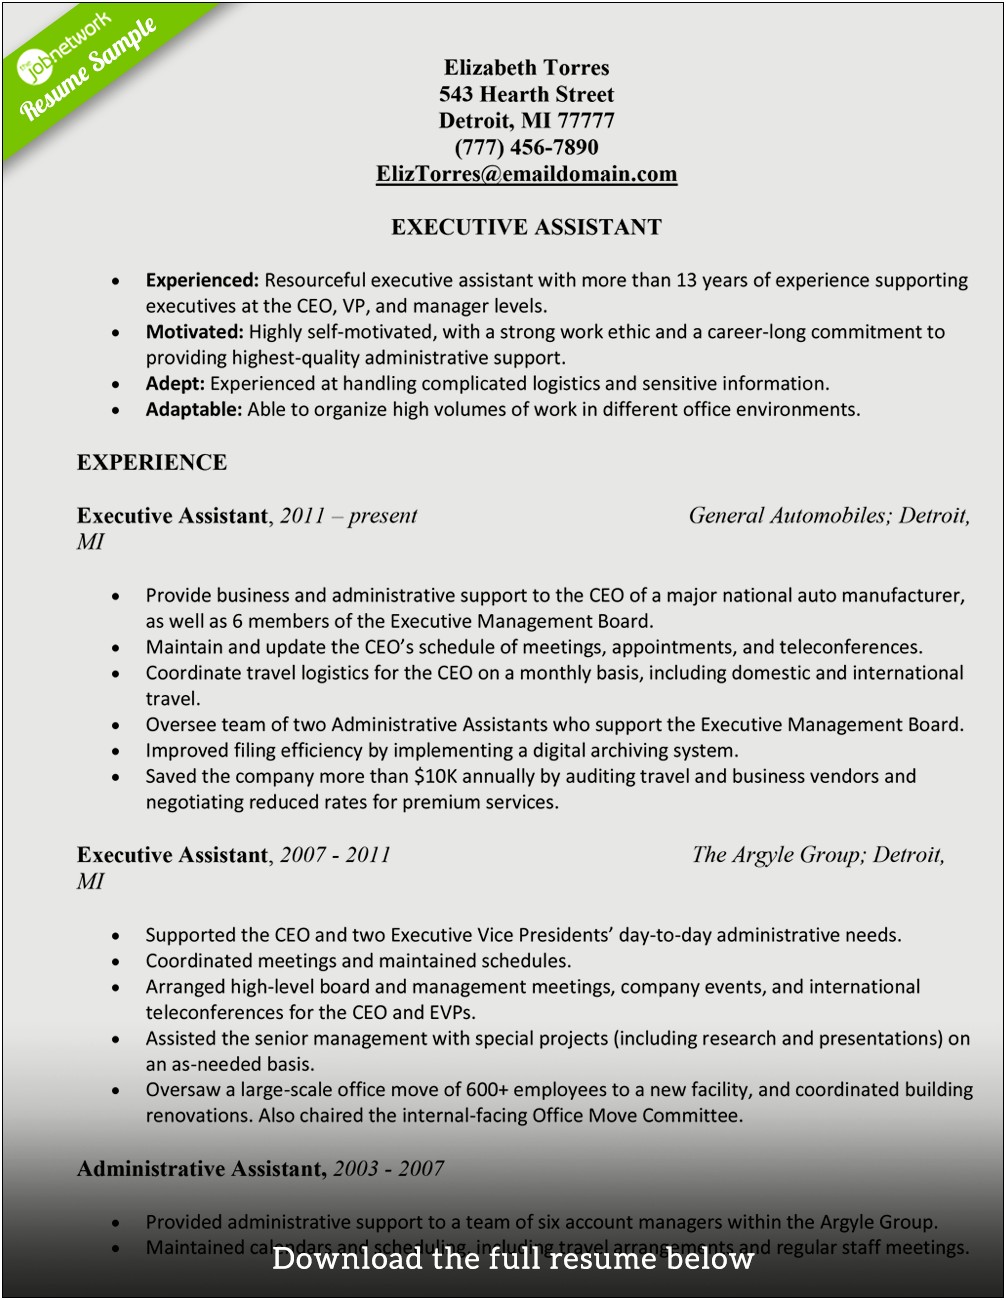 Resume Skills For Administrative Assistant Position